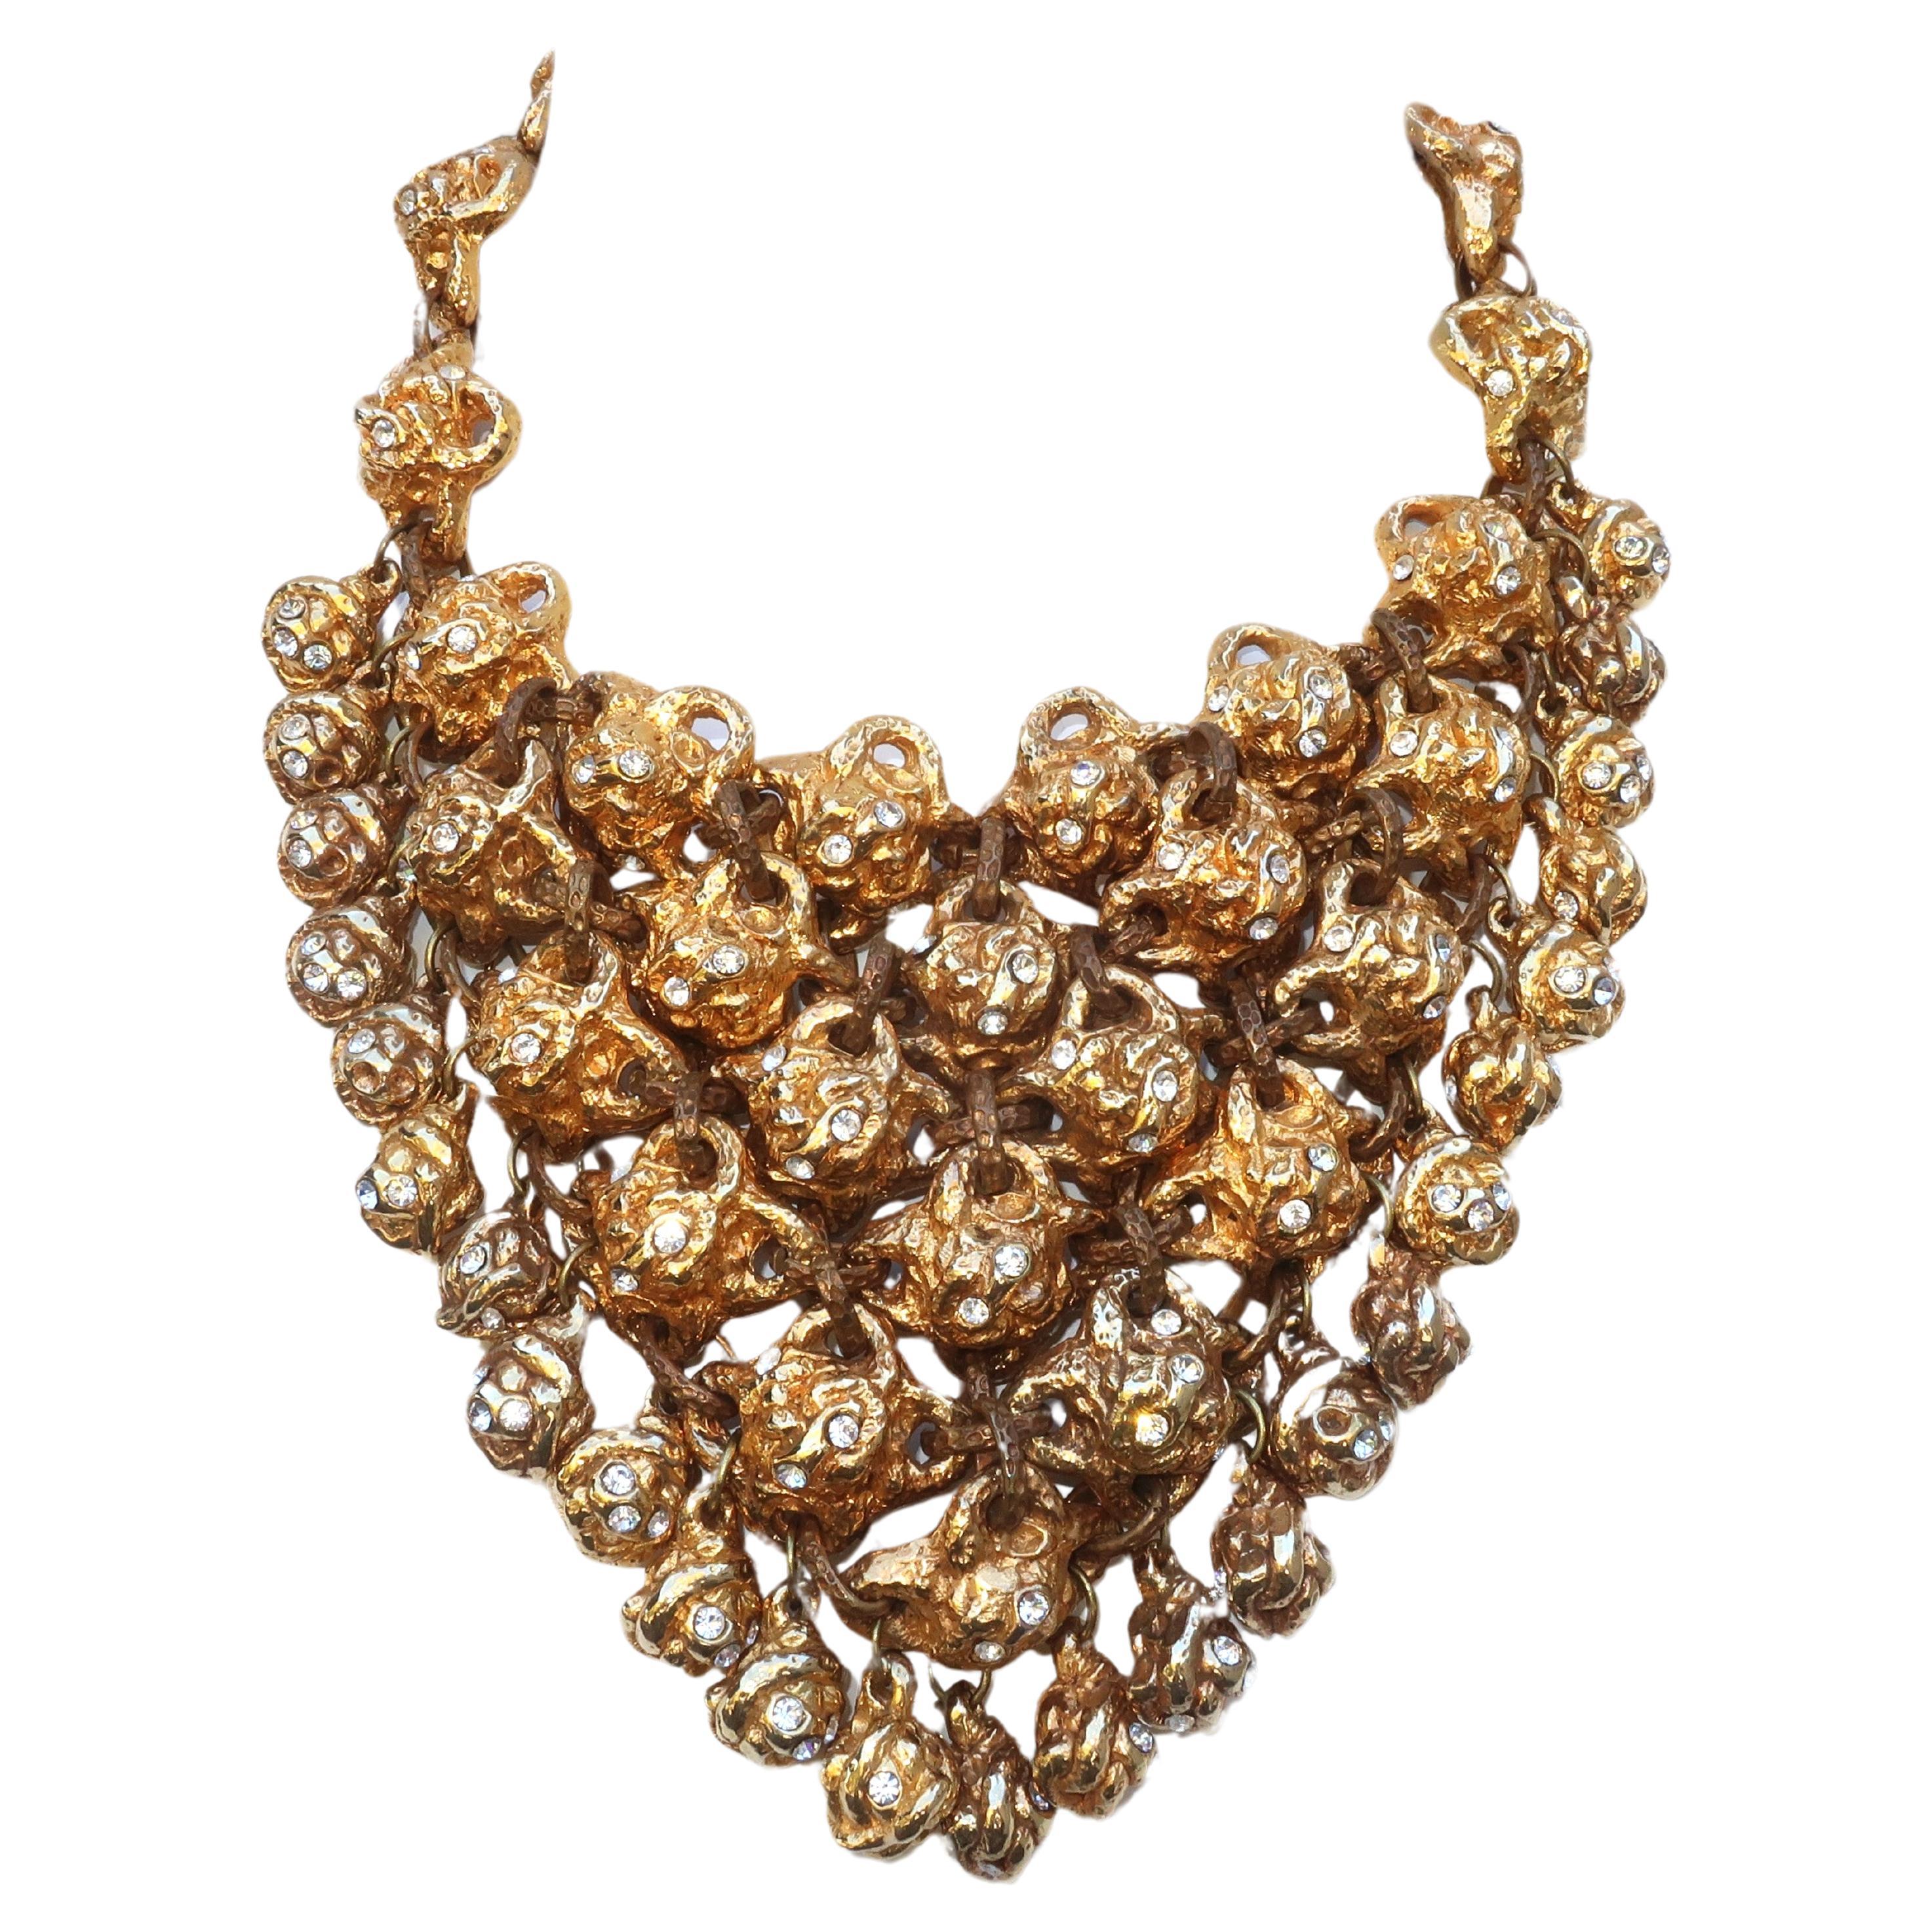 ALEXIS LAHELLEC Brutalist Gold Tone & Rhinestone French Bib Necklace, 1980’s For Sale